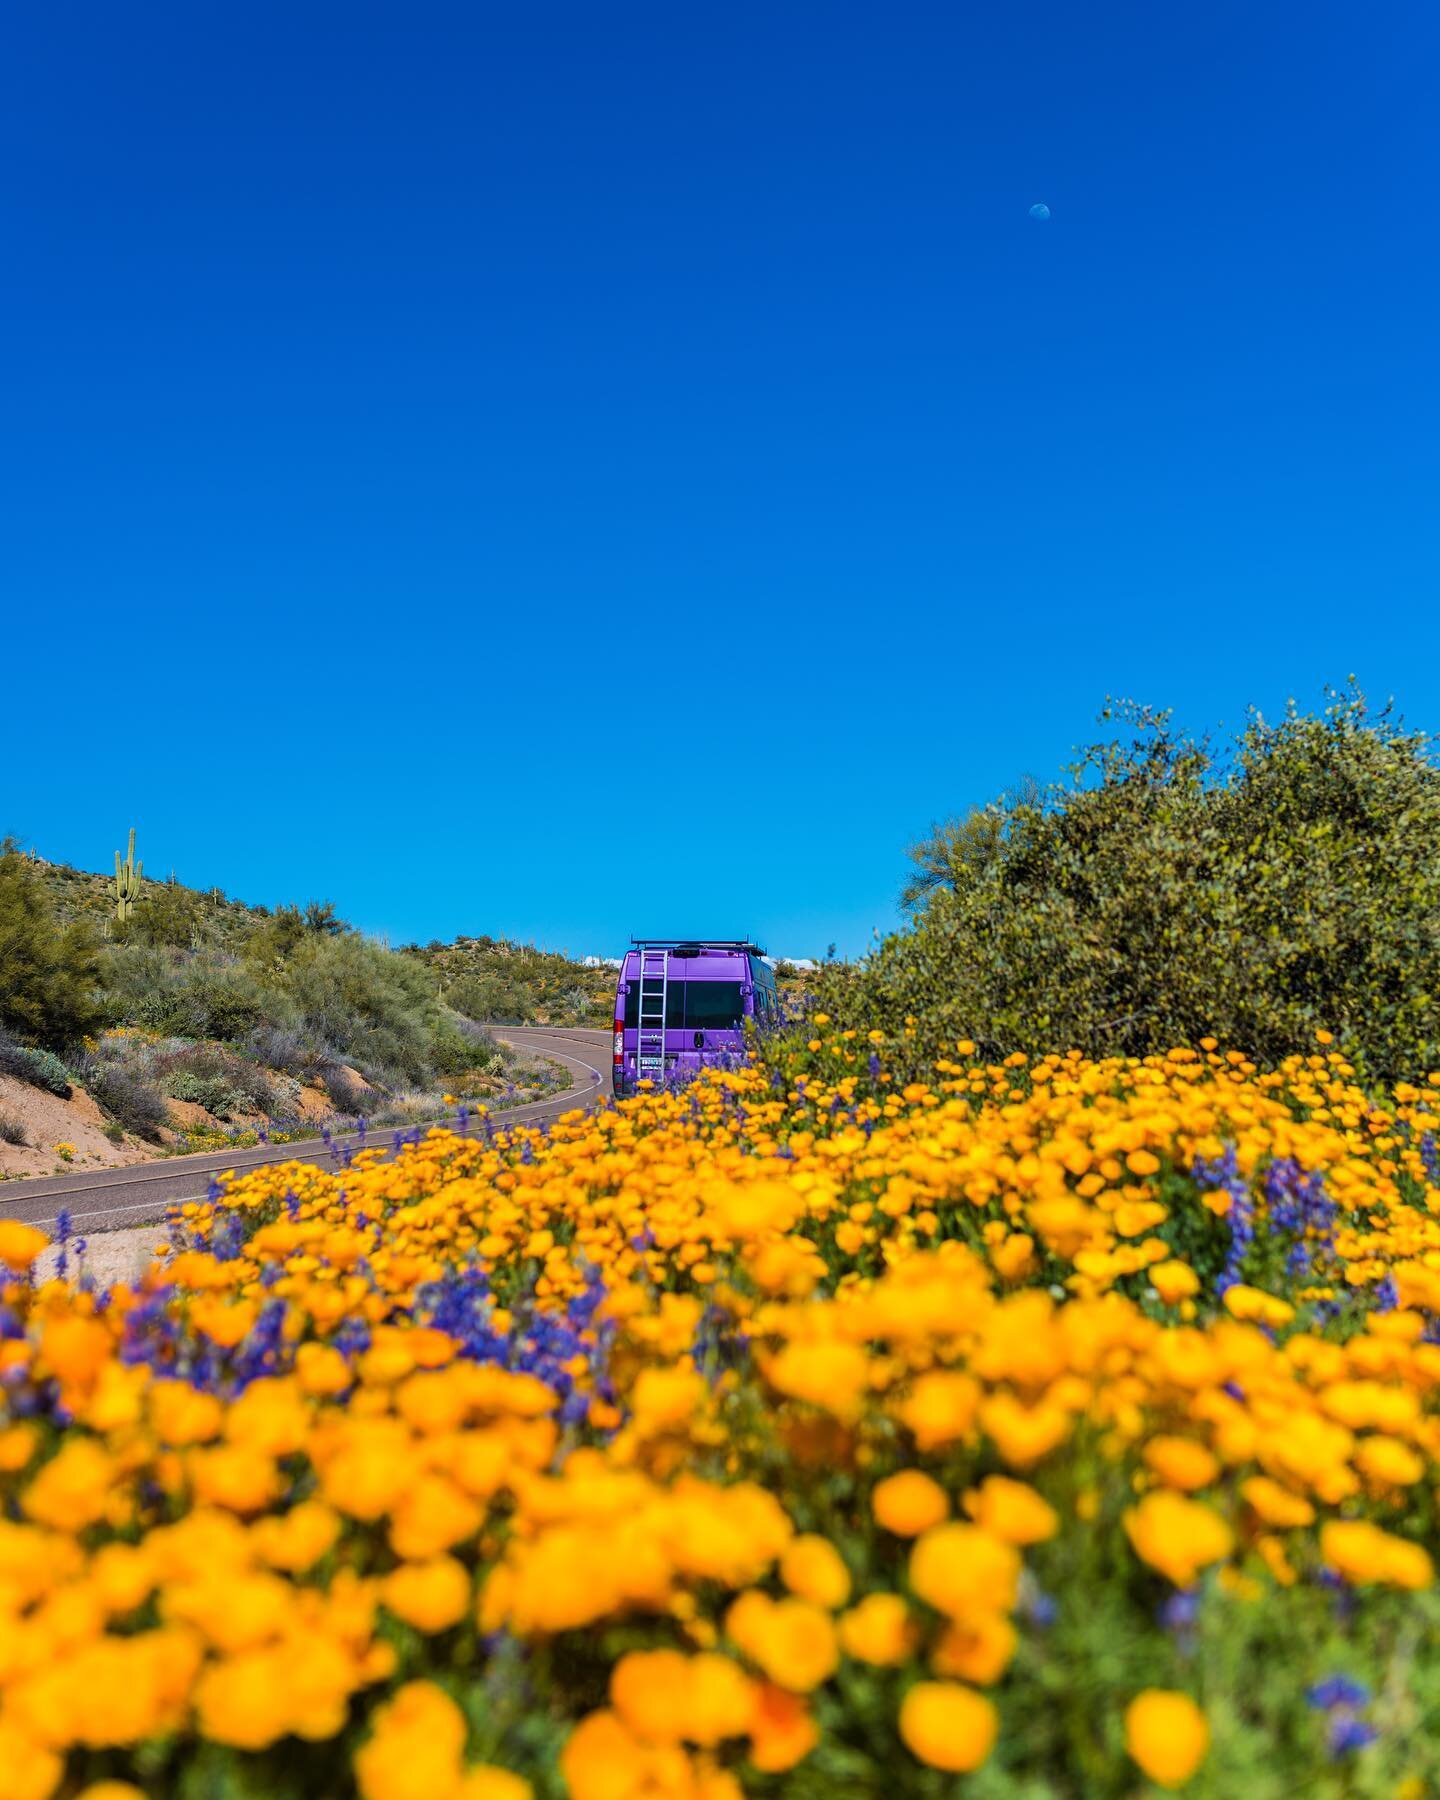 I truly miss living on the road in @dandythevan. Especially this time of year, when wildflowers carpet the desert floor.⠀
⠀
Captured on this day, in 2019.